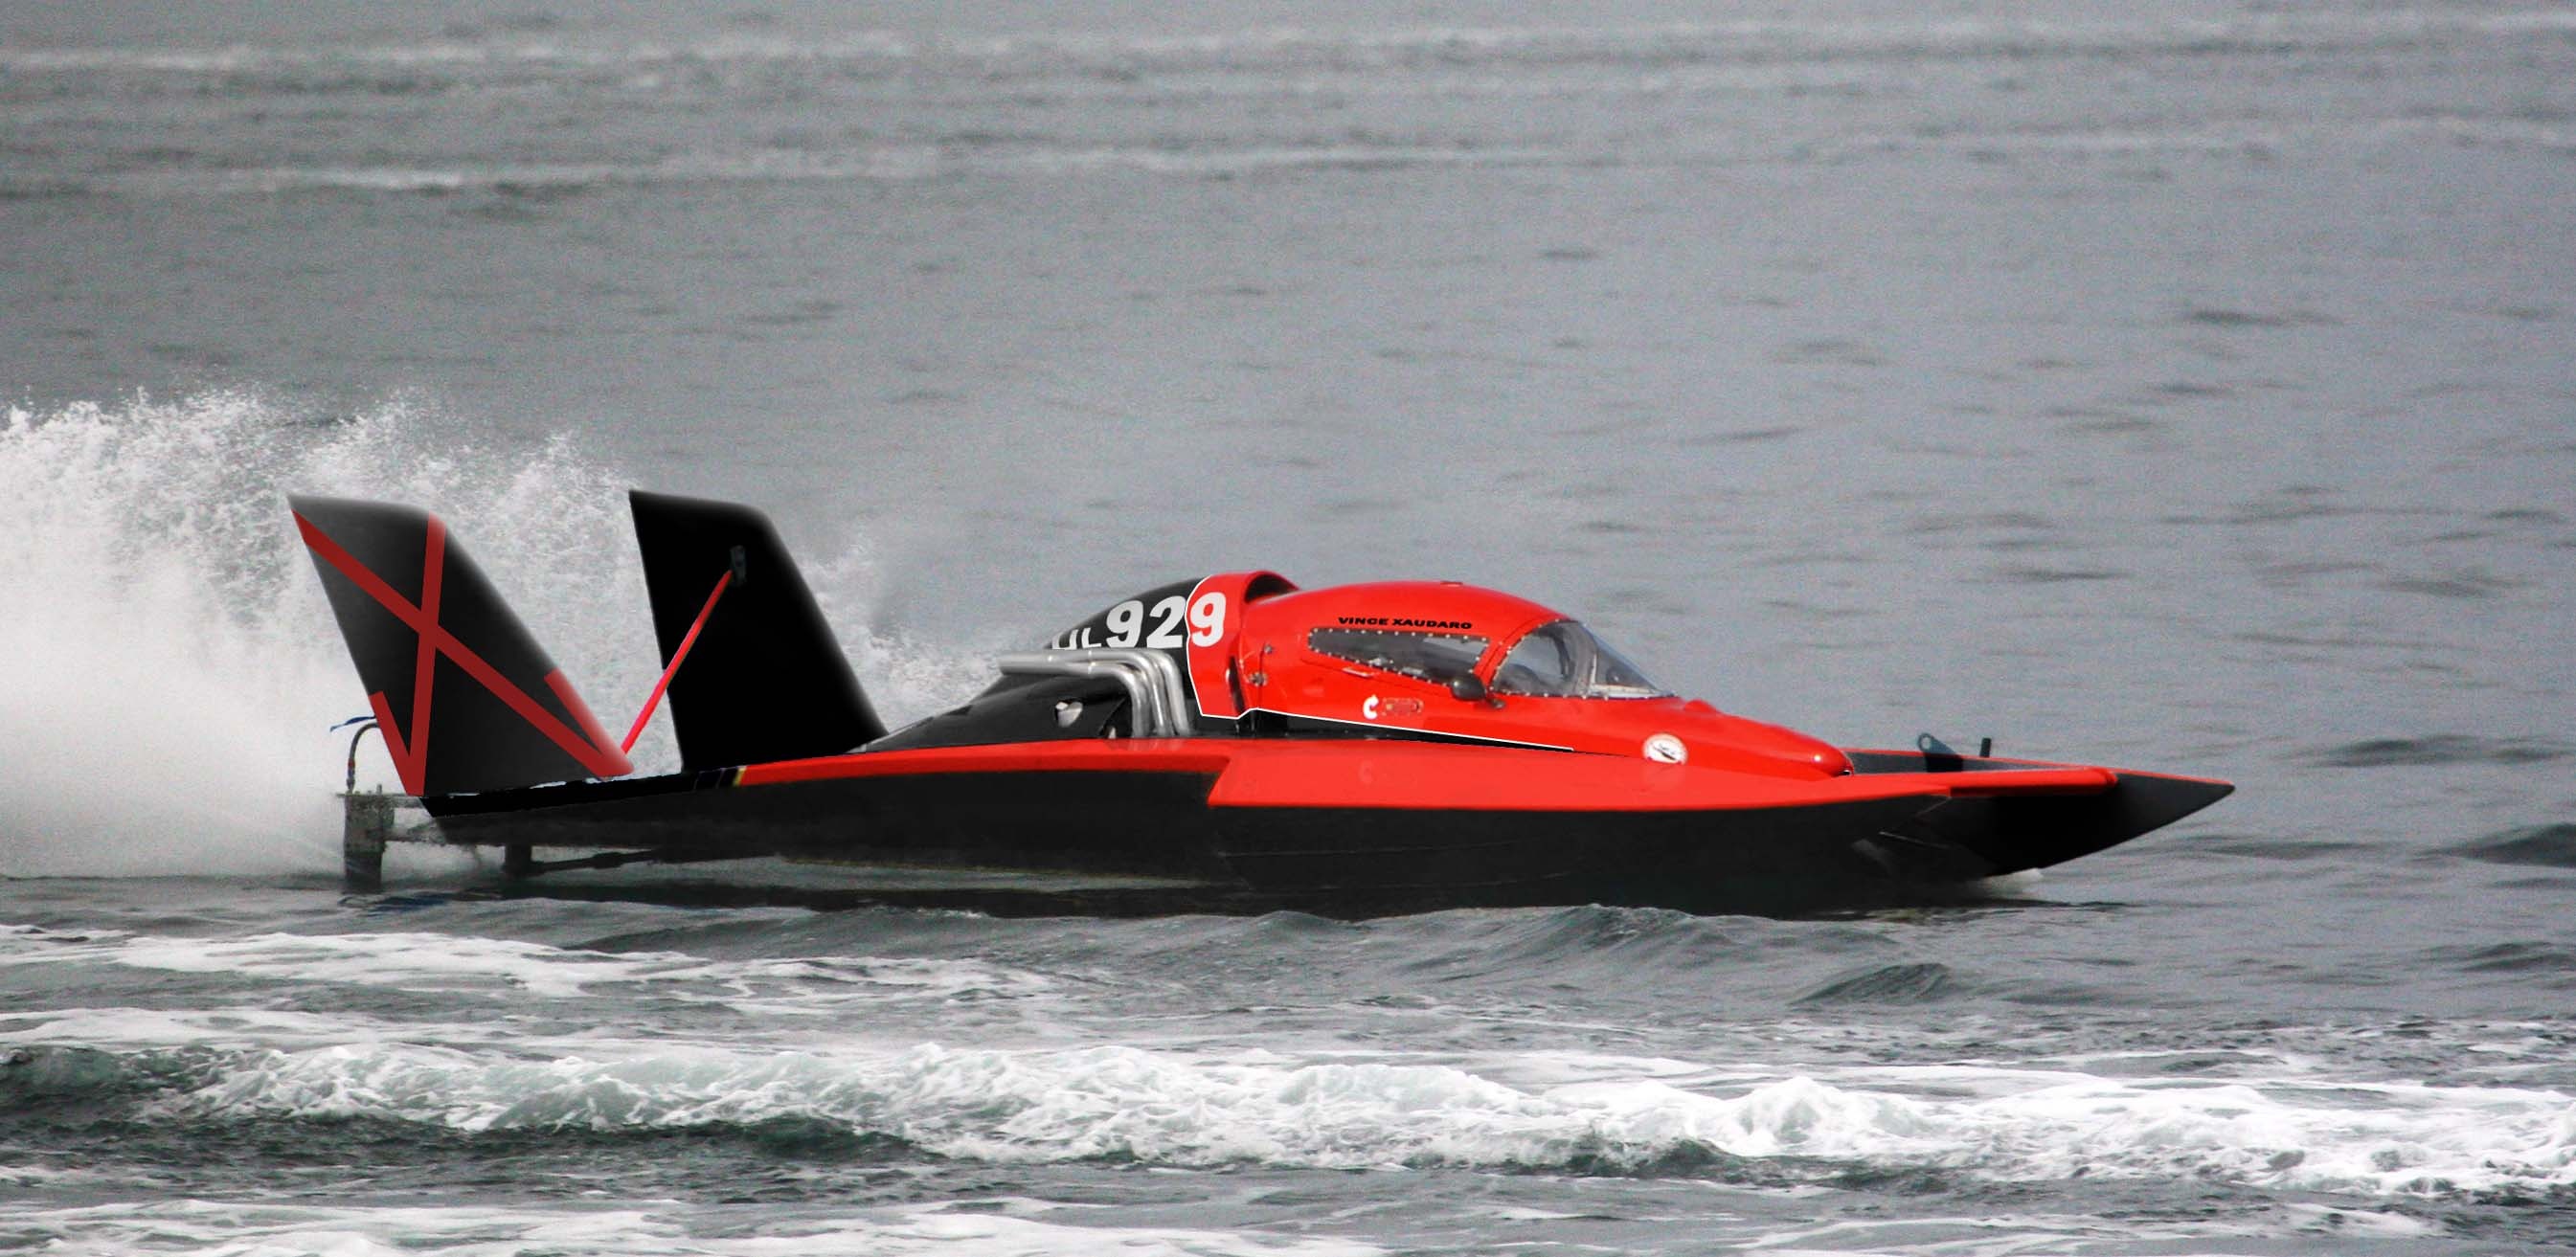 Hydroplane: Racing, Jet boat, capable of obtaining very high speeds. 2690x1320 Dual Screen Wallpaper.